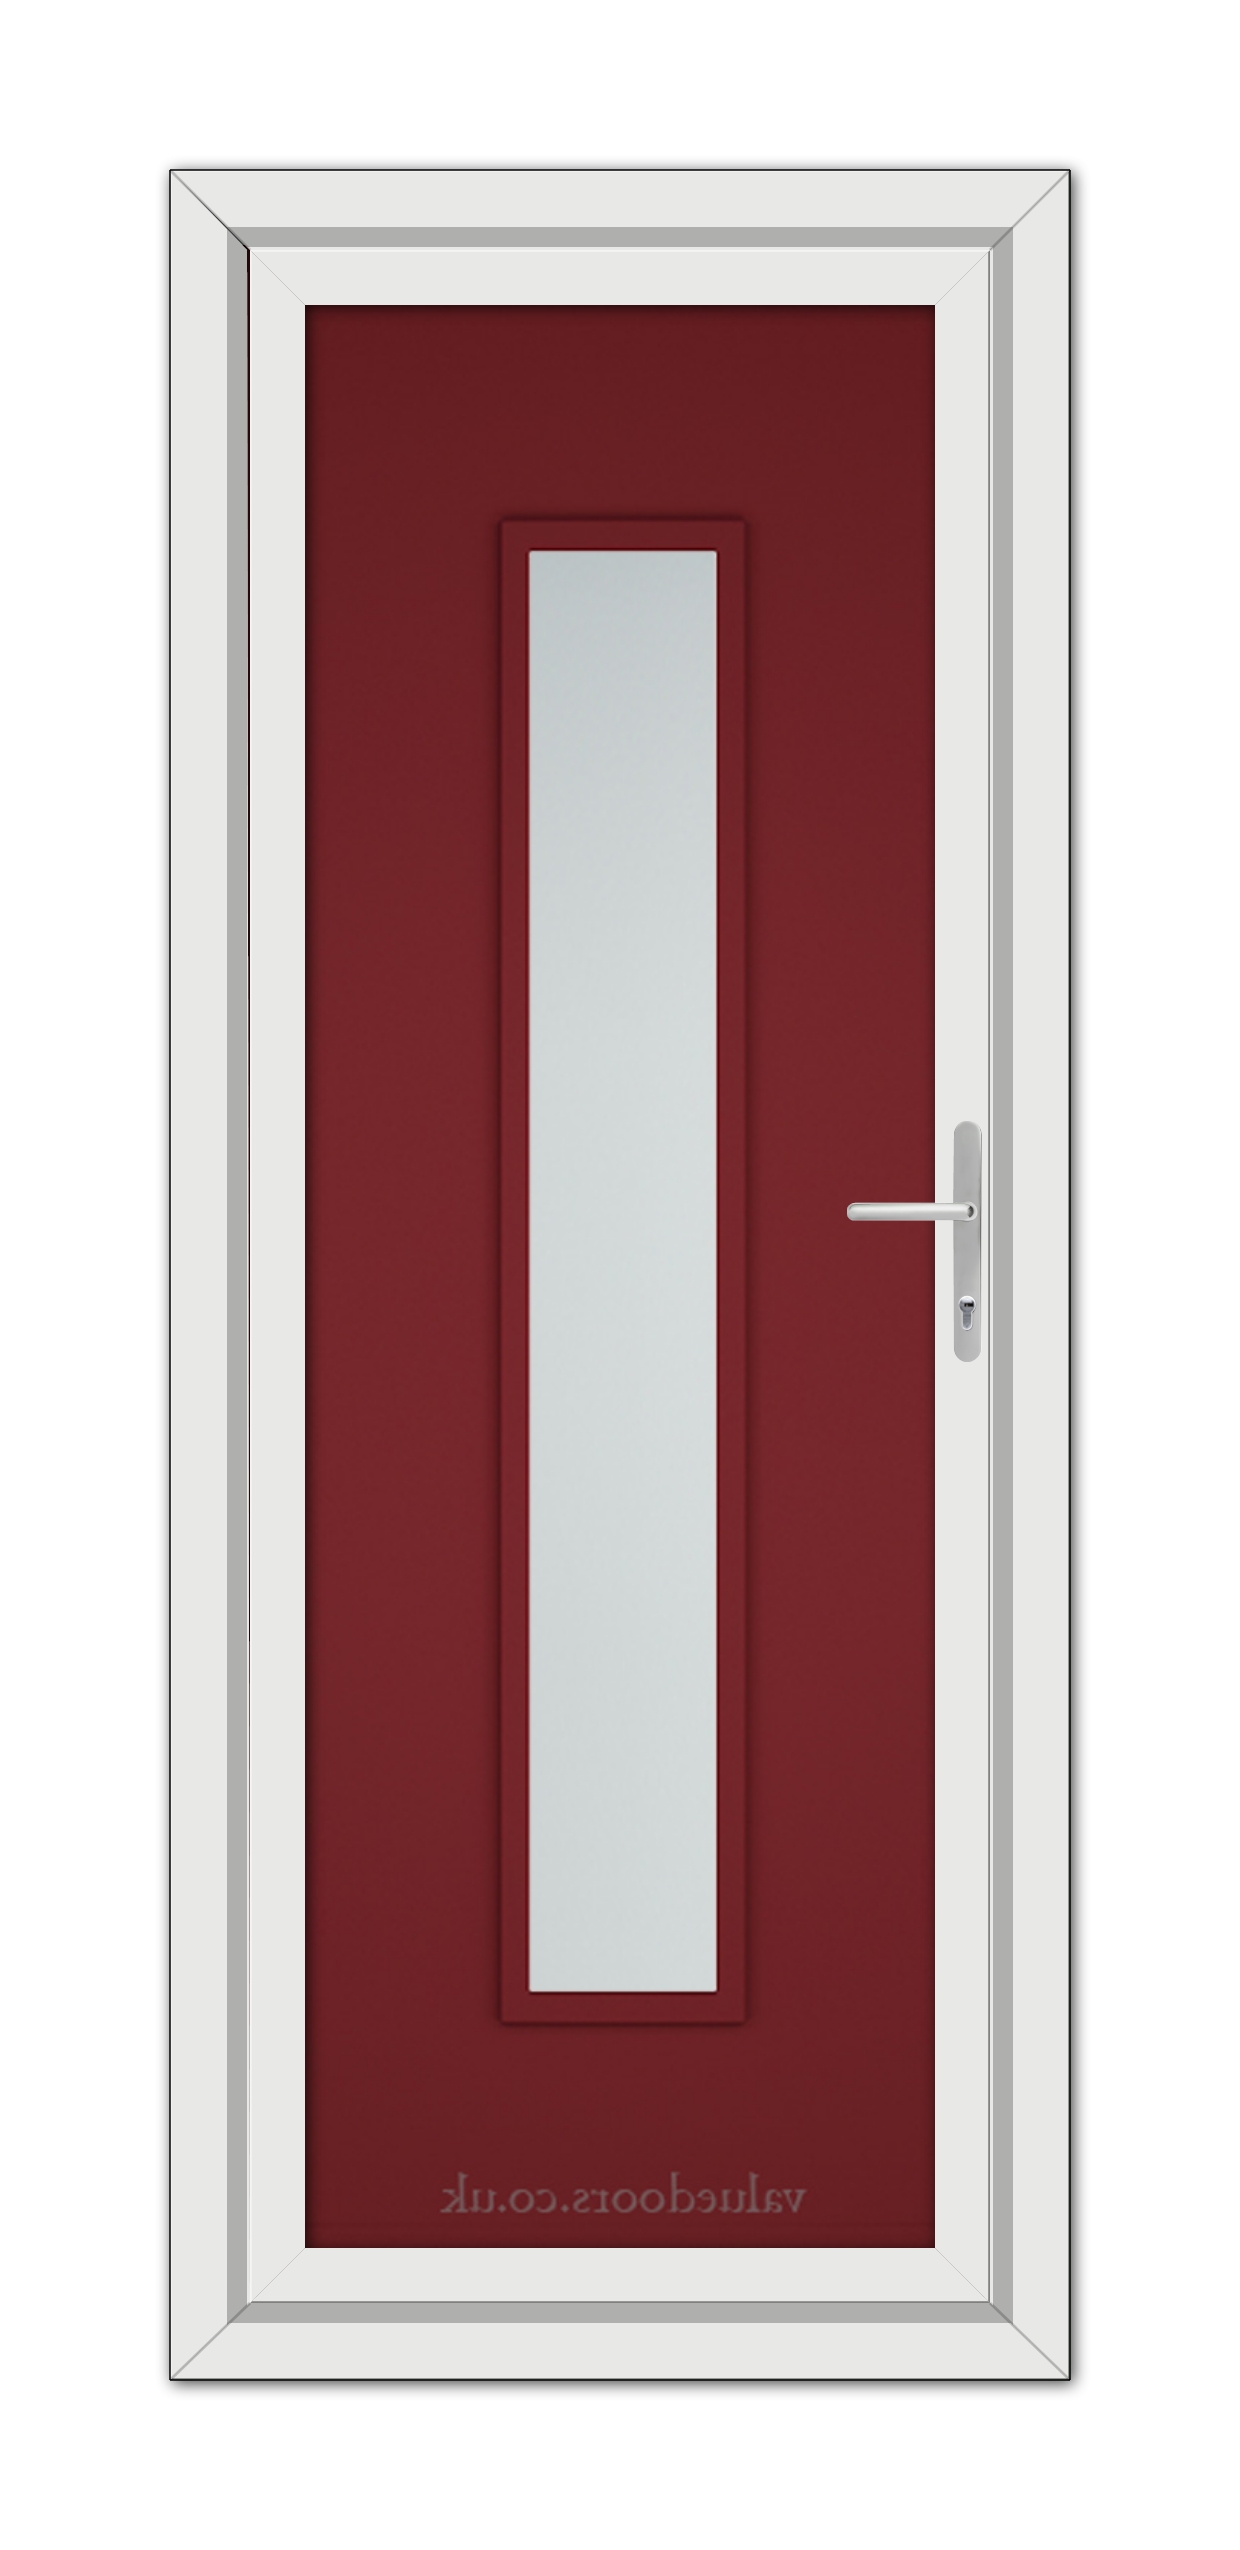 A Red Modern 5101 uPVC door with a white frame.